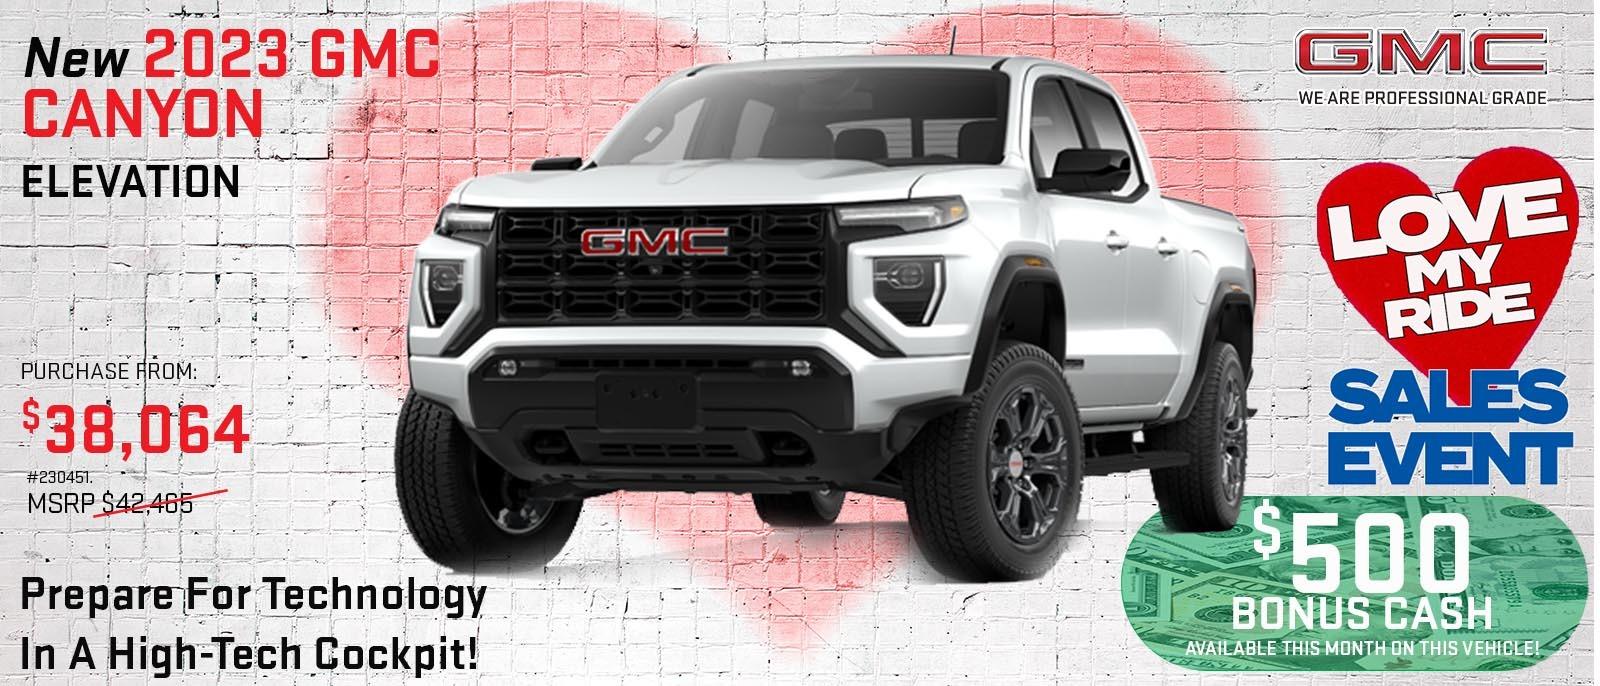 View the GMC Canyon Special in Denver at Shortline